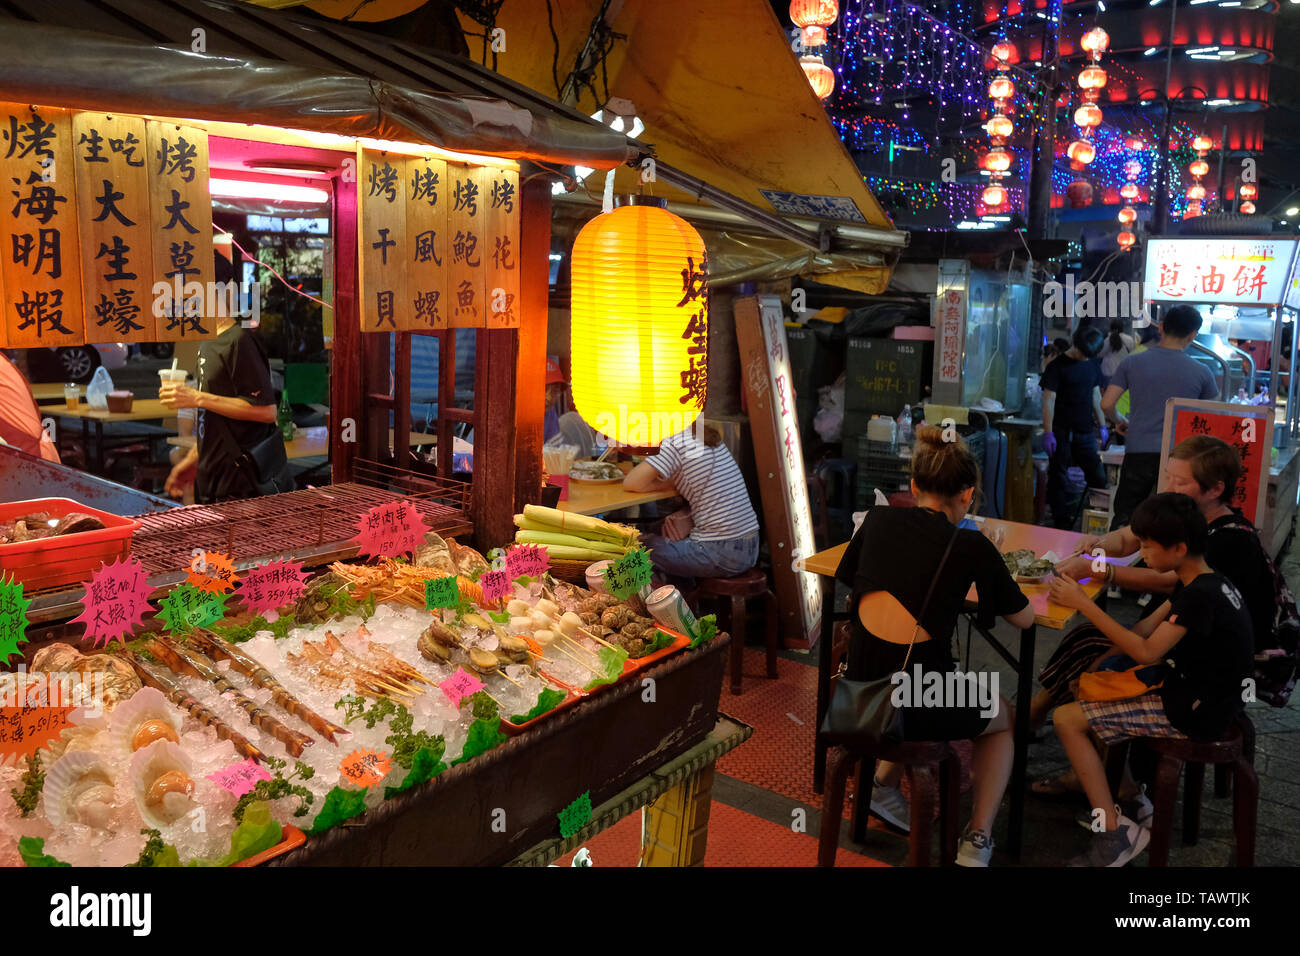 Food stall at Raohe Street Night Market one of the oldest night markets in Songshan District, Taipei, Taiwan. Stock Photo